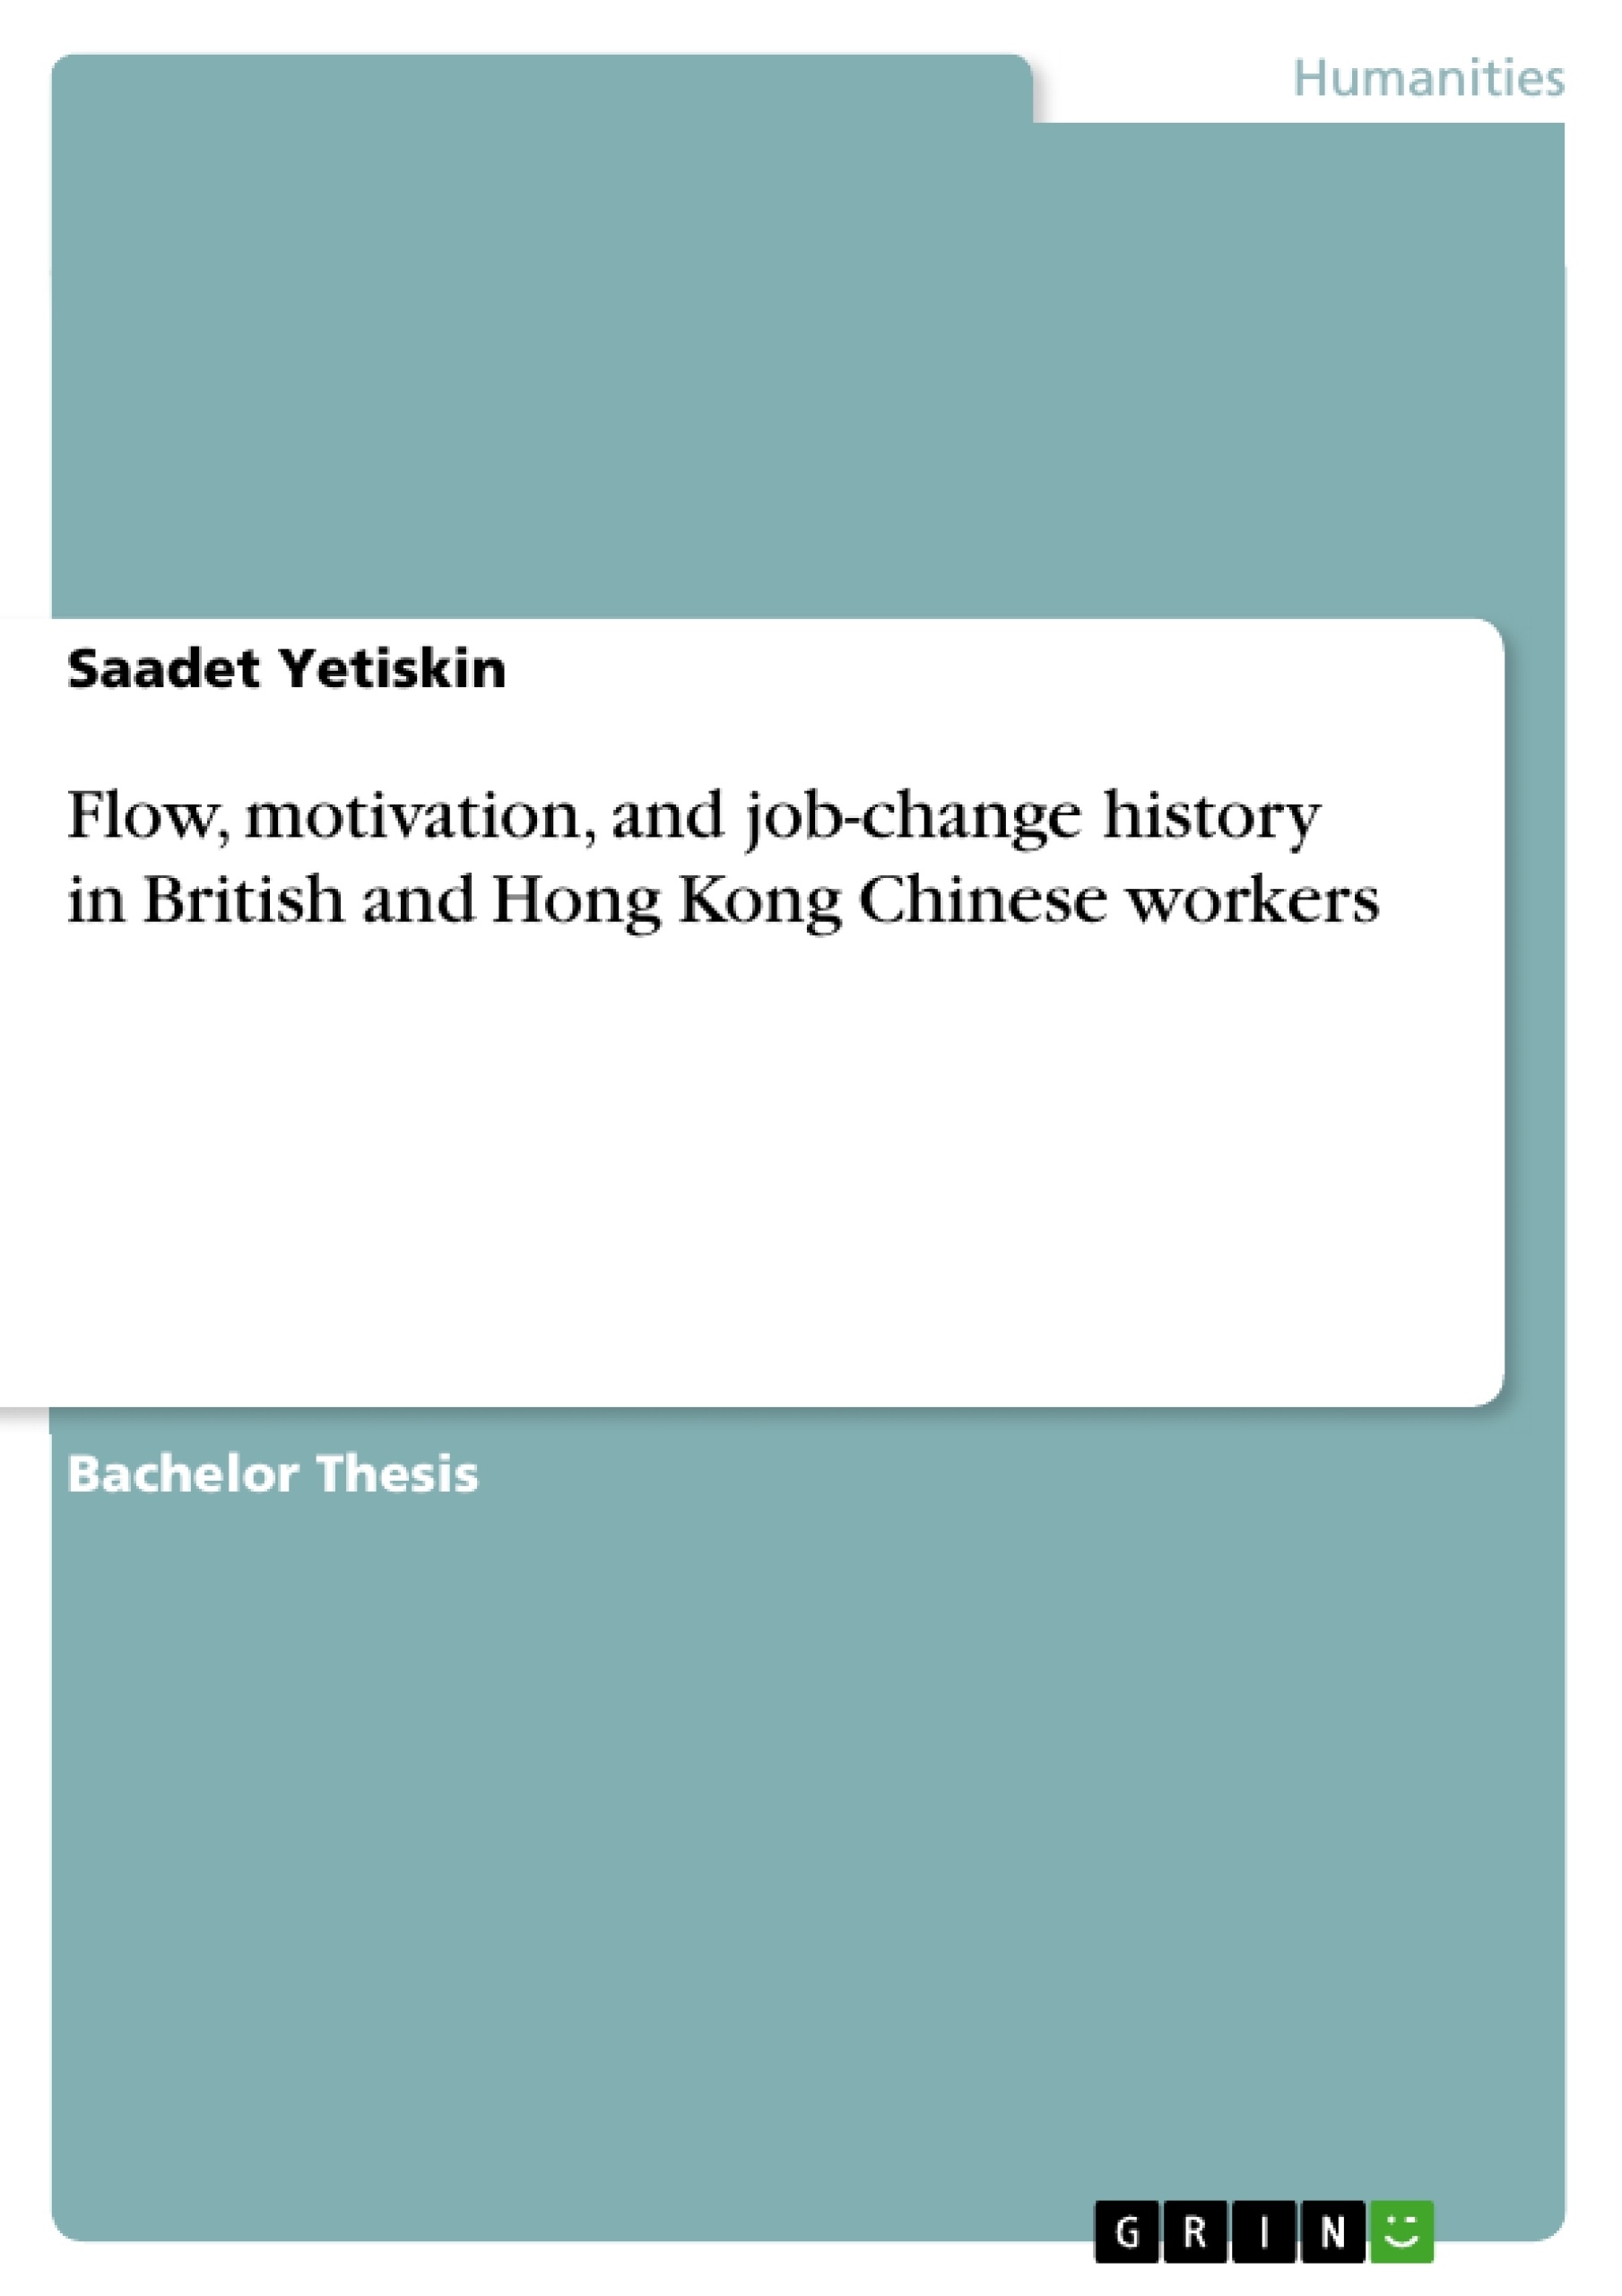 Titre: Flow, motivation, and job-change history in British and Hong Kong Chinese workers